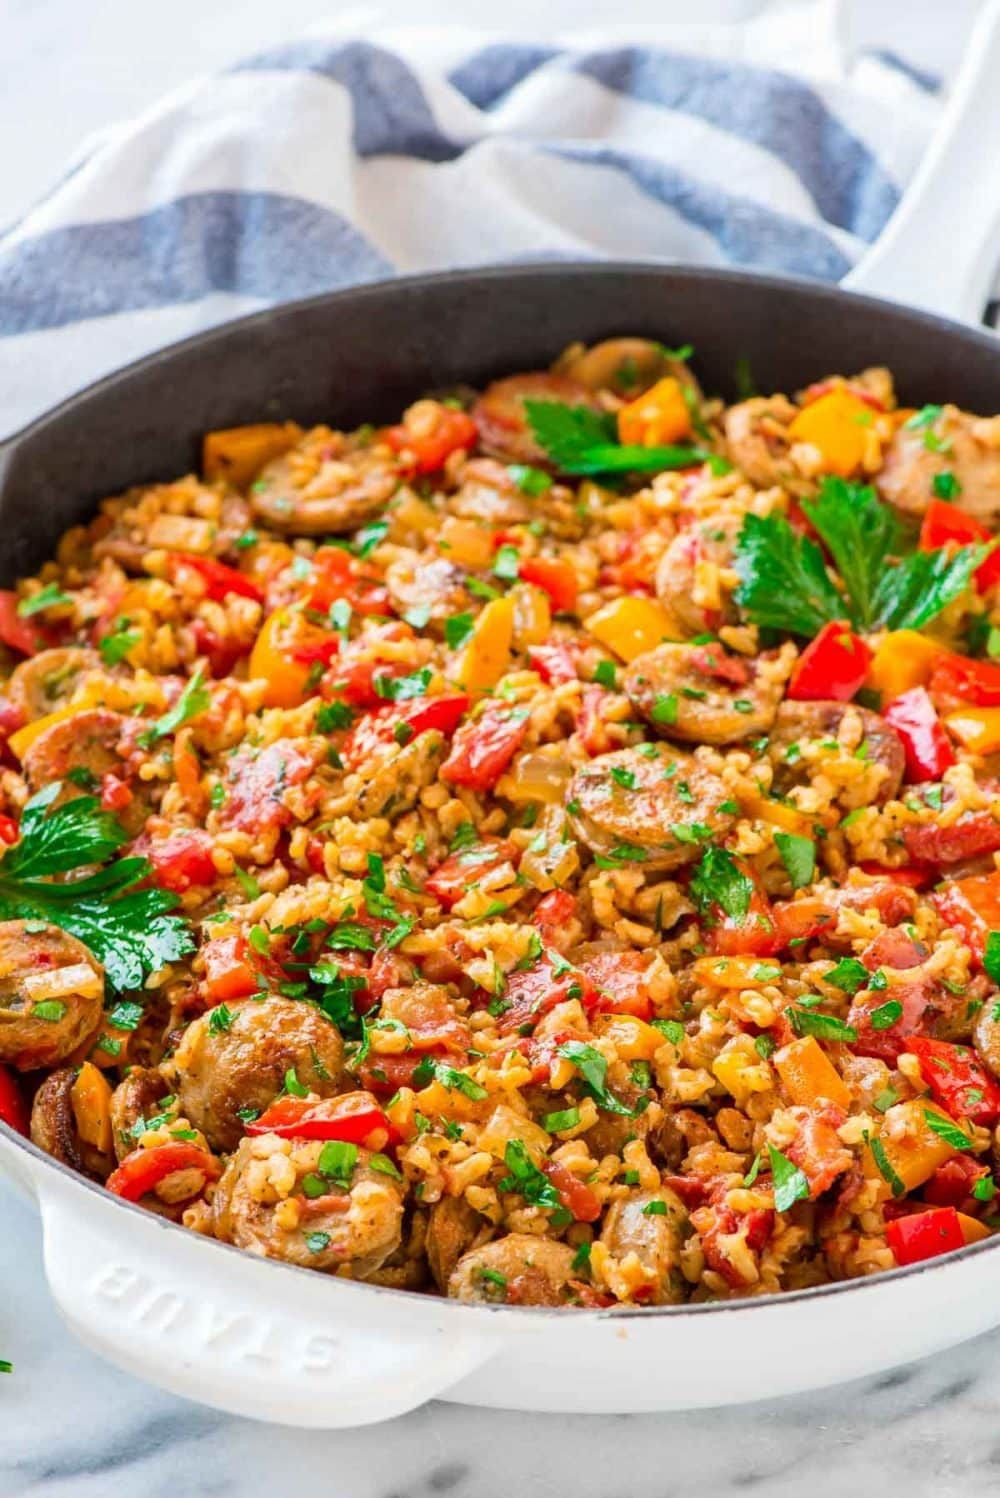 Recipes with Ground Italian Sausage Fresh Italian Sausage and Rice Casserole with Peppers